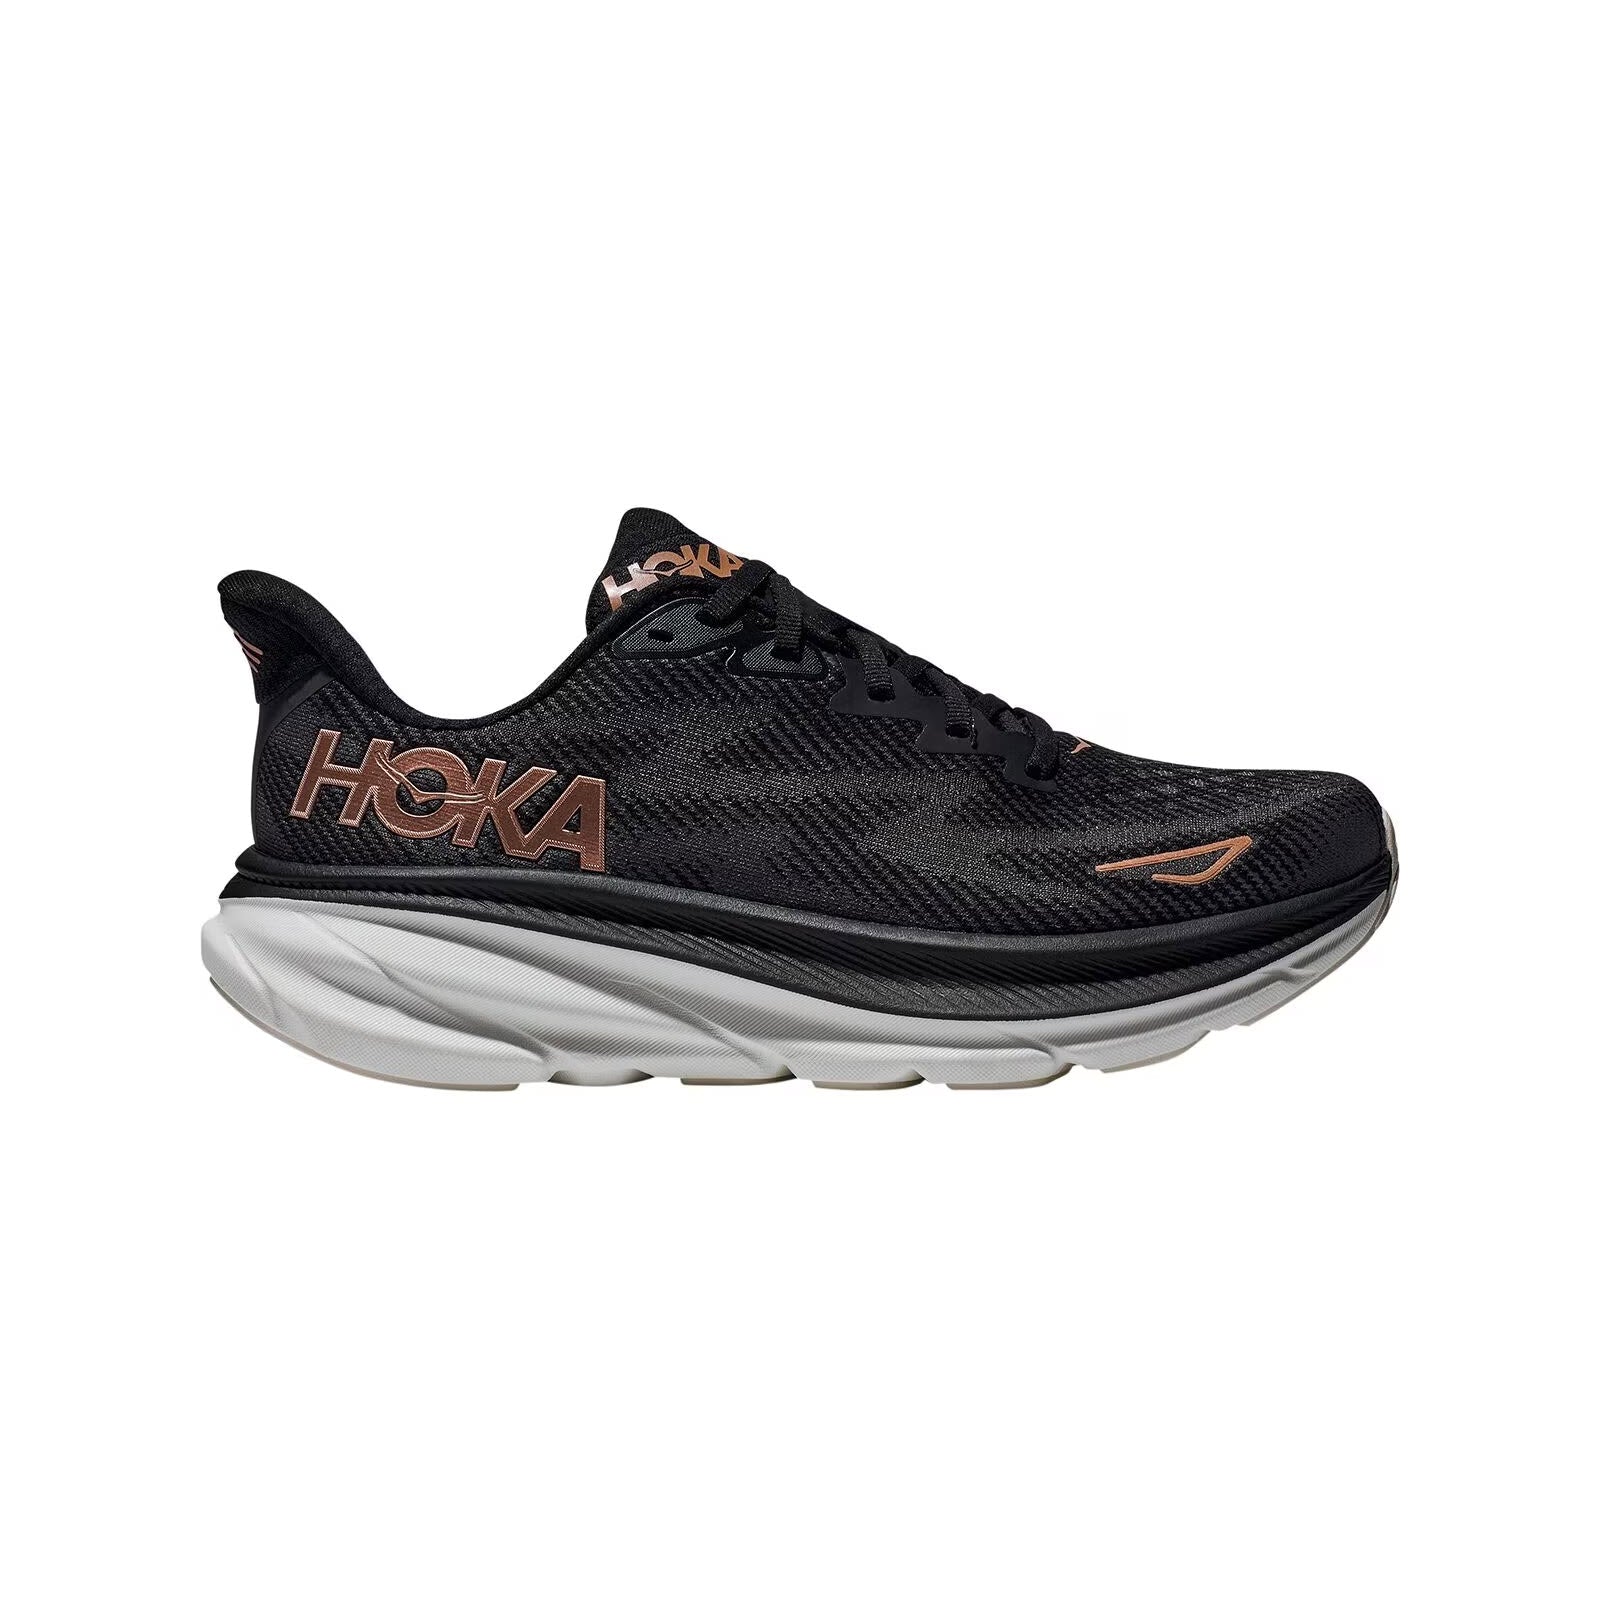 Black and white Hoka Clifton 9 running shoe, featuring a prominent logo and a streamlined design, isolated on a white background.